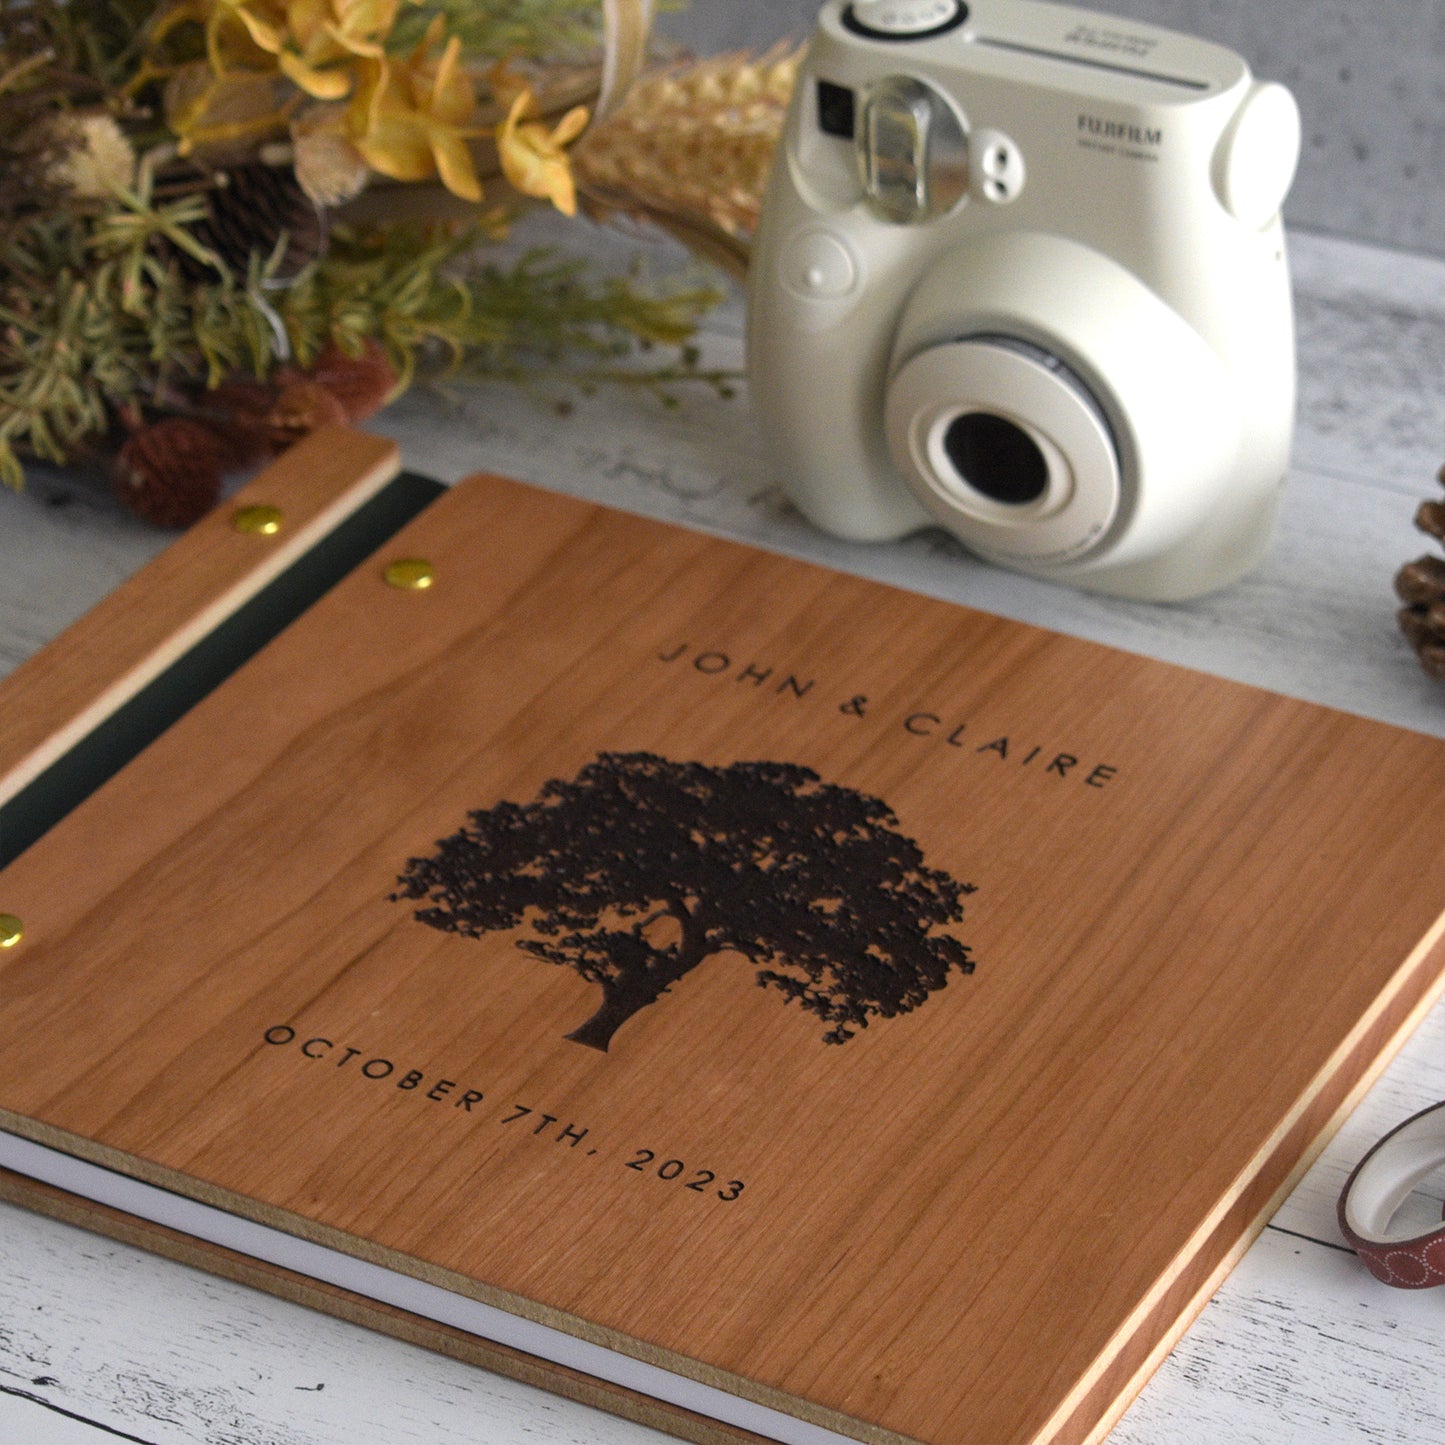 An 8.5x11" guest book lies on a table. Made of cherry wood, black vegan leather binding, and copper hardware. The front cover includes an engraved design with personalized names.